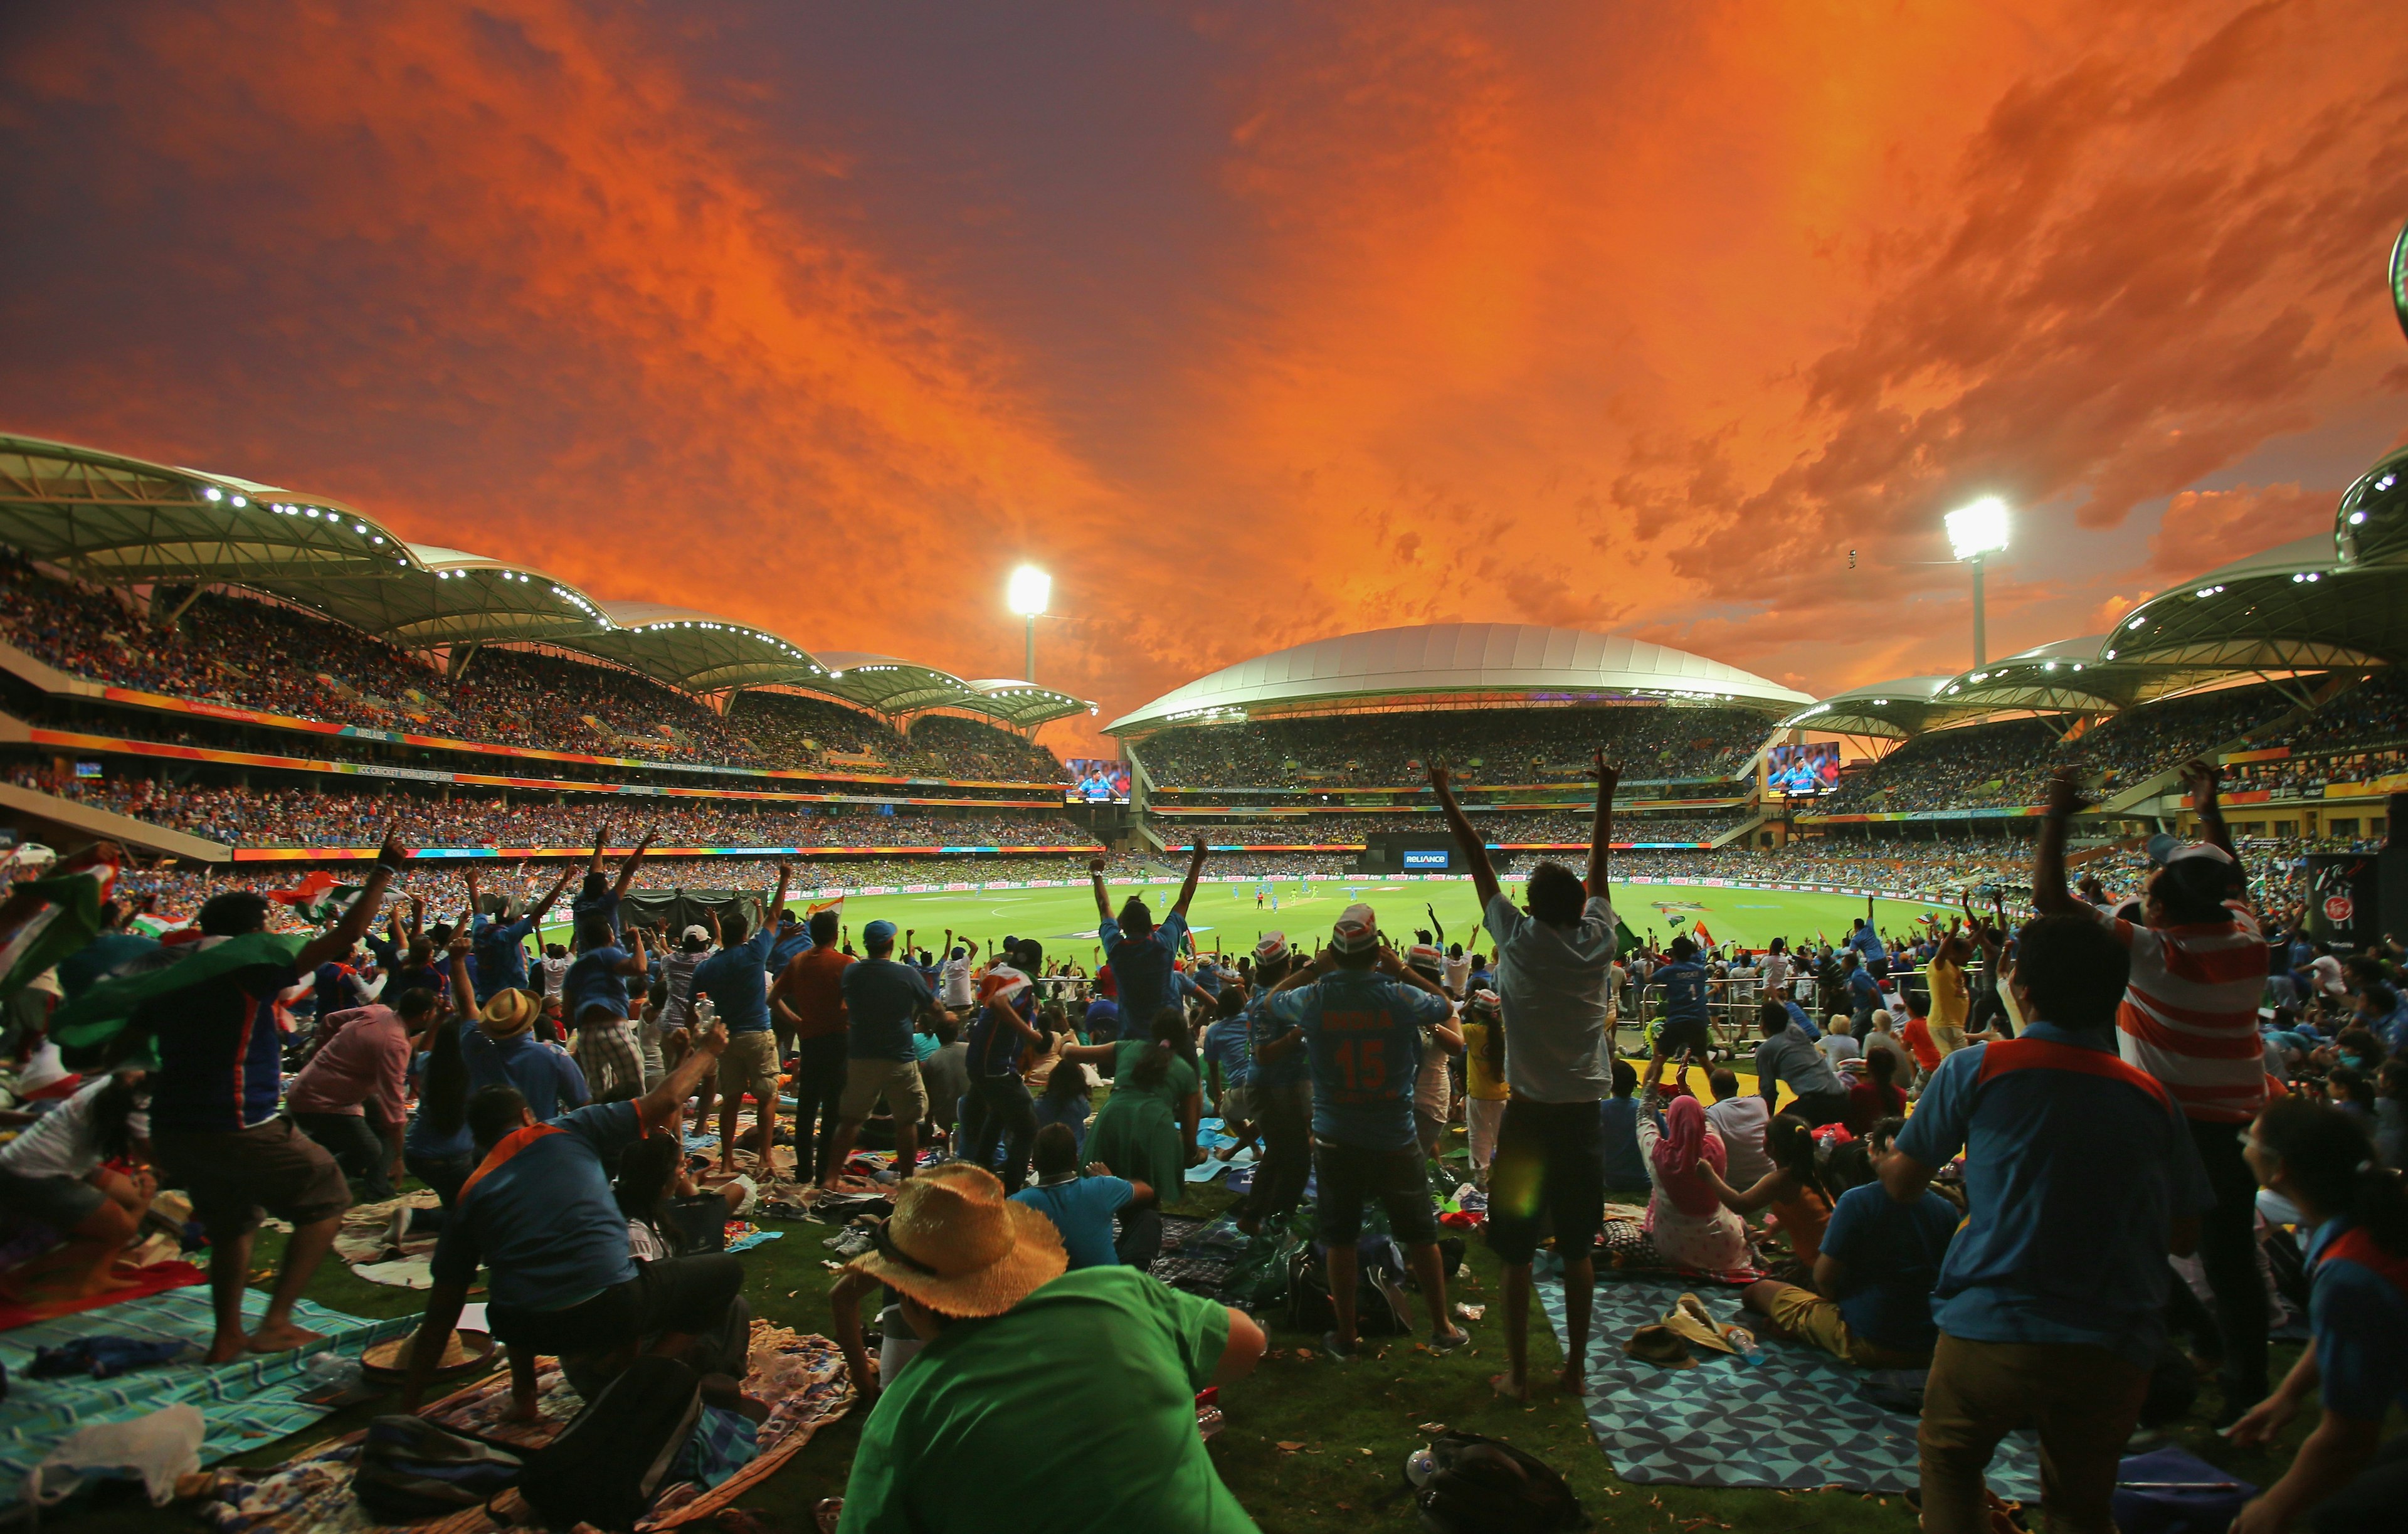 Adelaide Oval ICC Cricket 2015